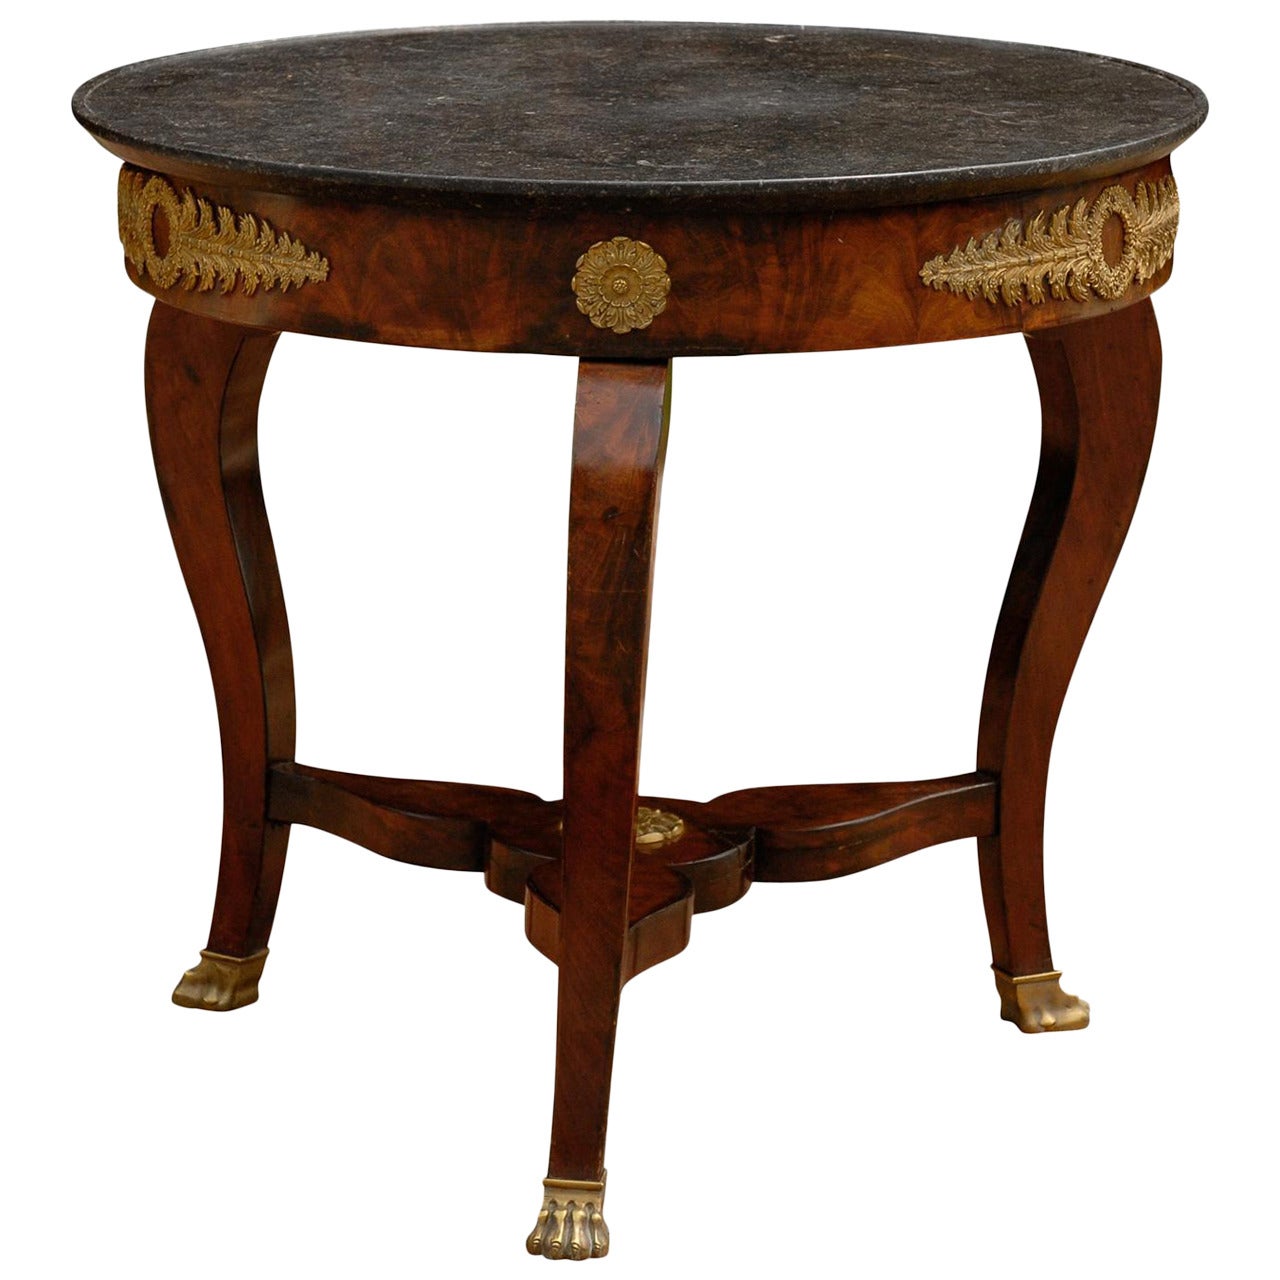 French Empire Guéridon Table with Marble Top, Cabriole Legs and Bronze Décor